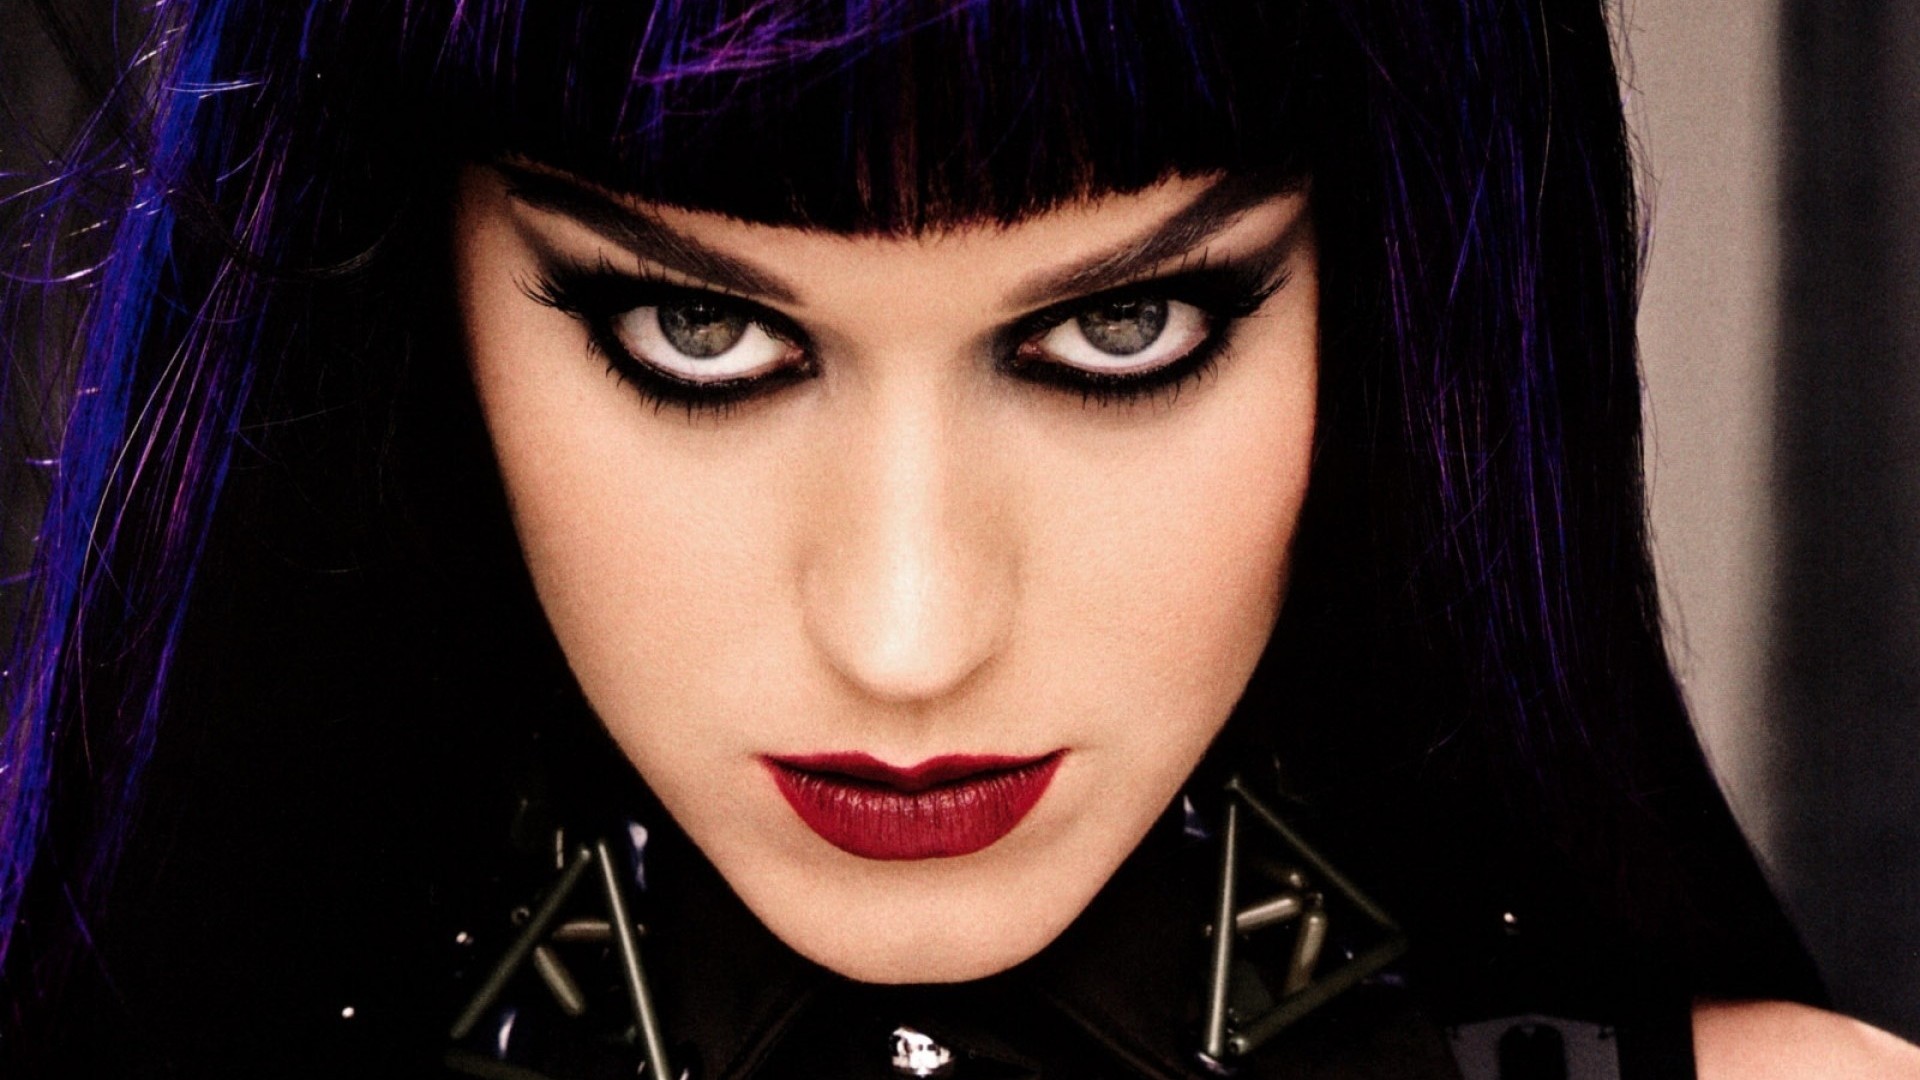 1920x1080 Preview wallpaper katy perry, celebrity, singer, image, 2015 